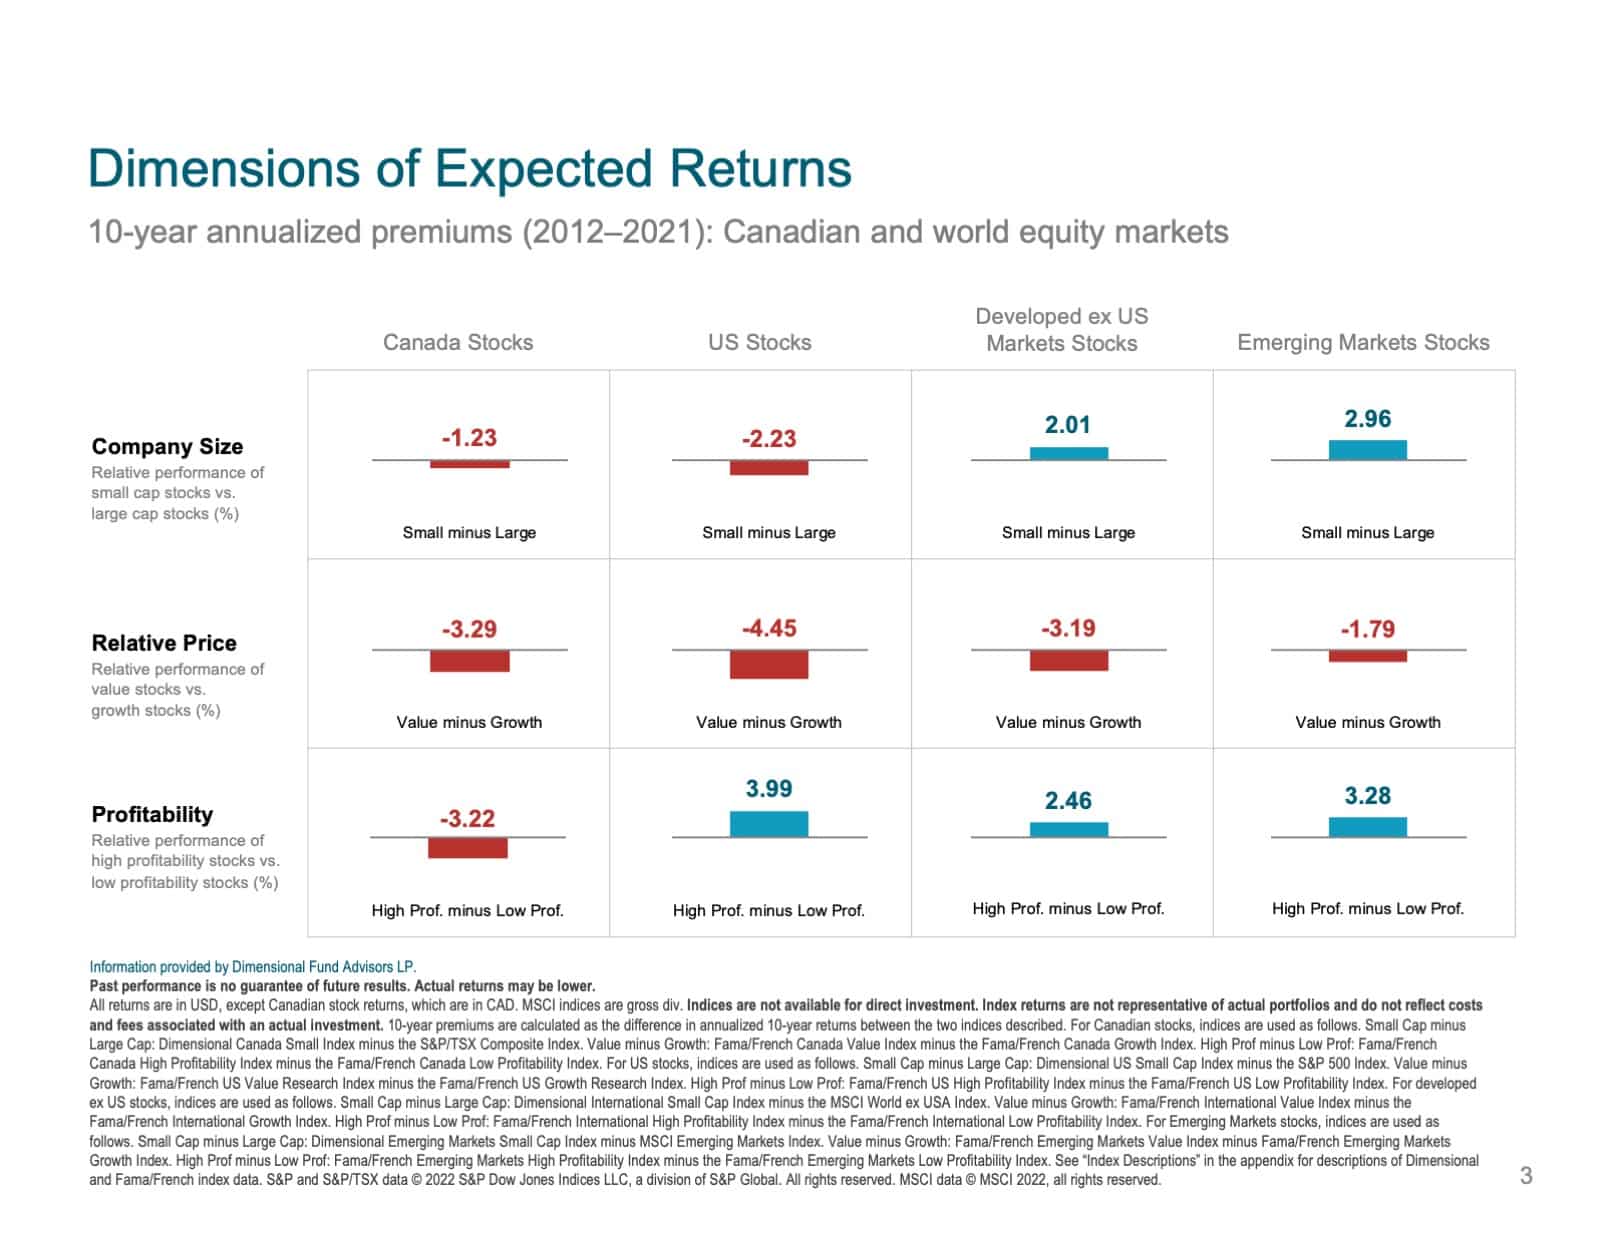 Dimensions of Expected Returns 2